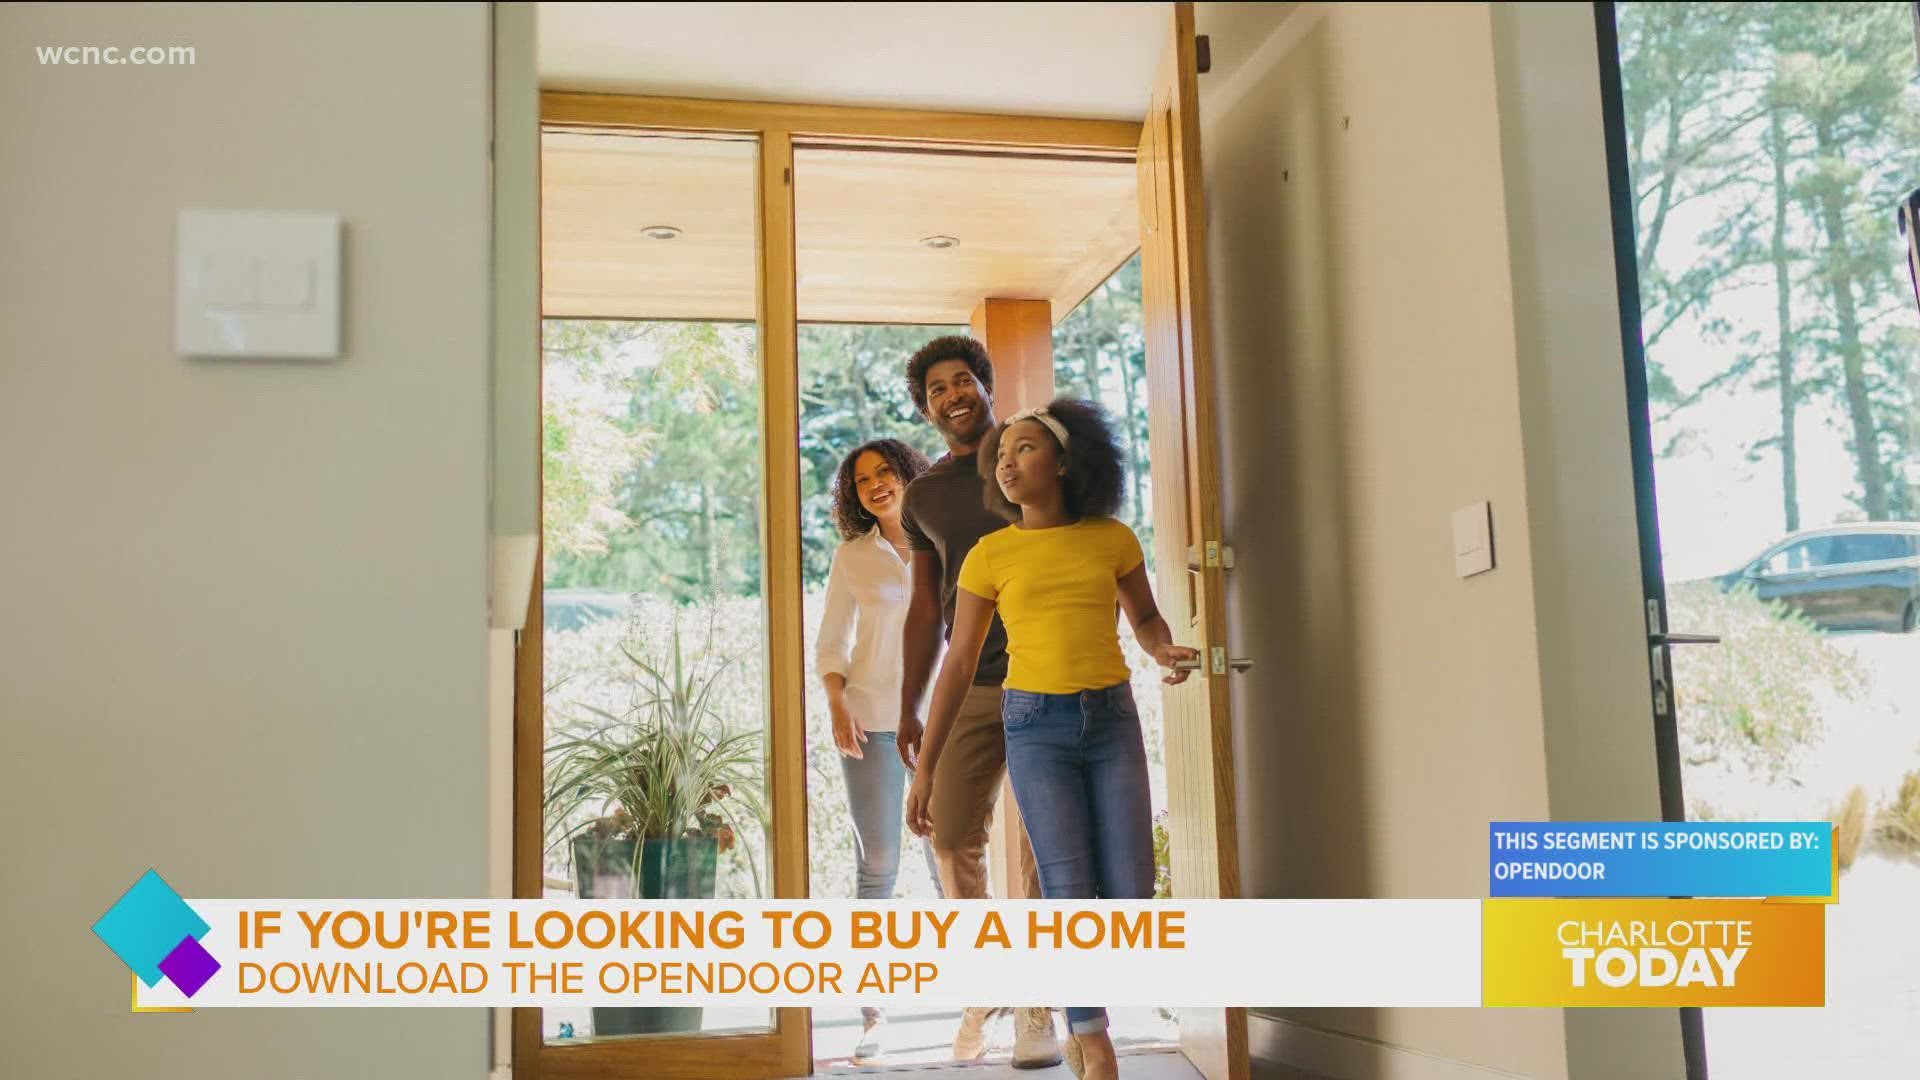 The Charlotte housing market is booming, so let Opendoor help